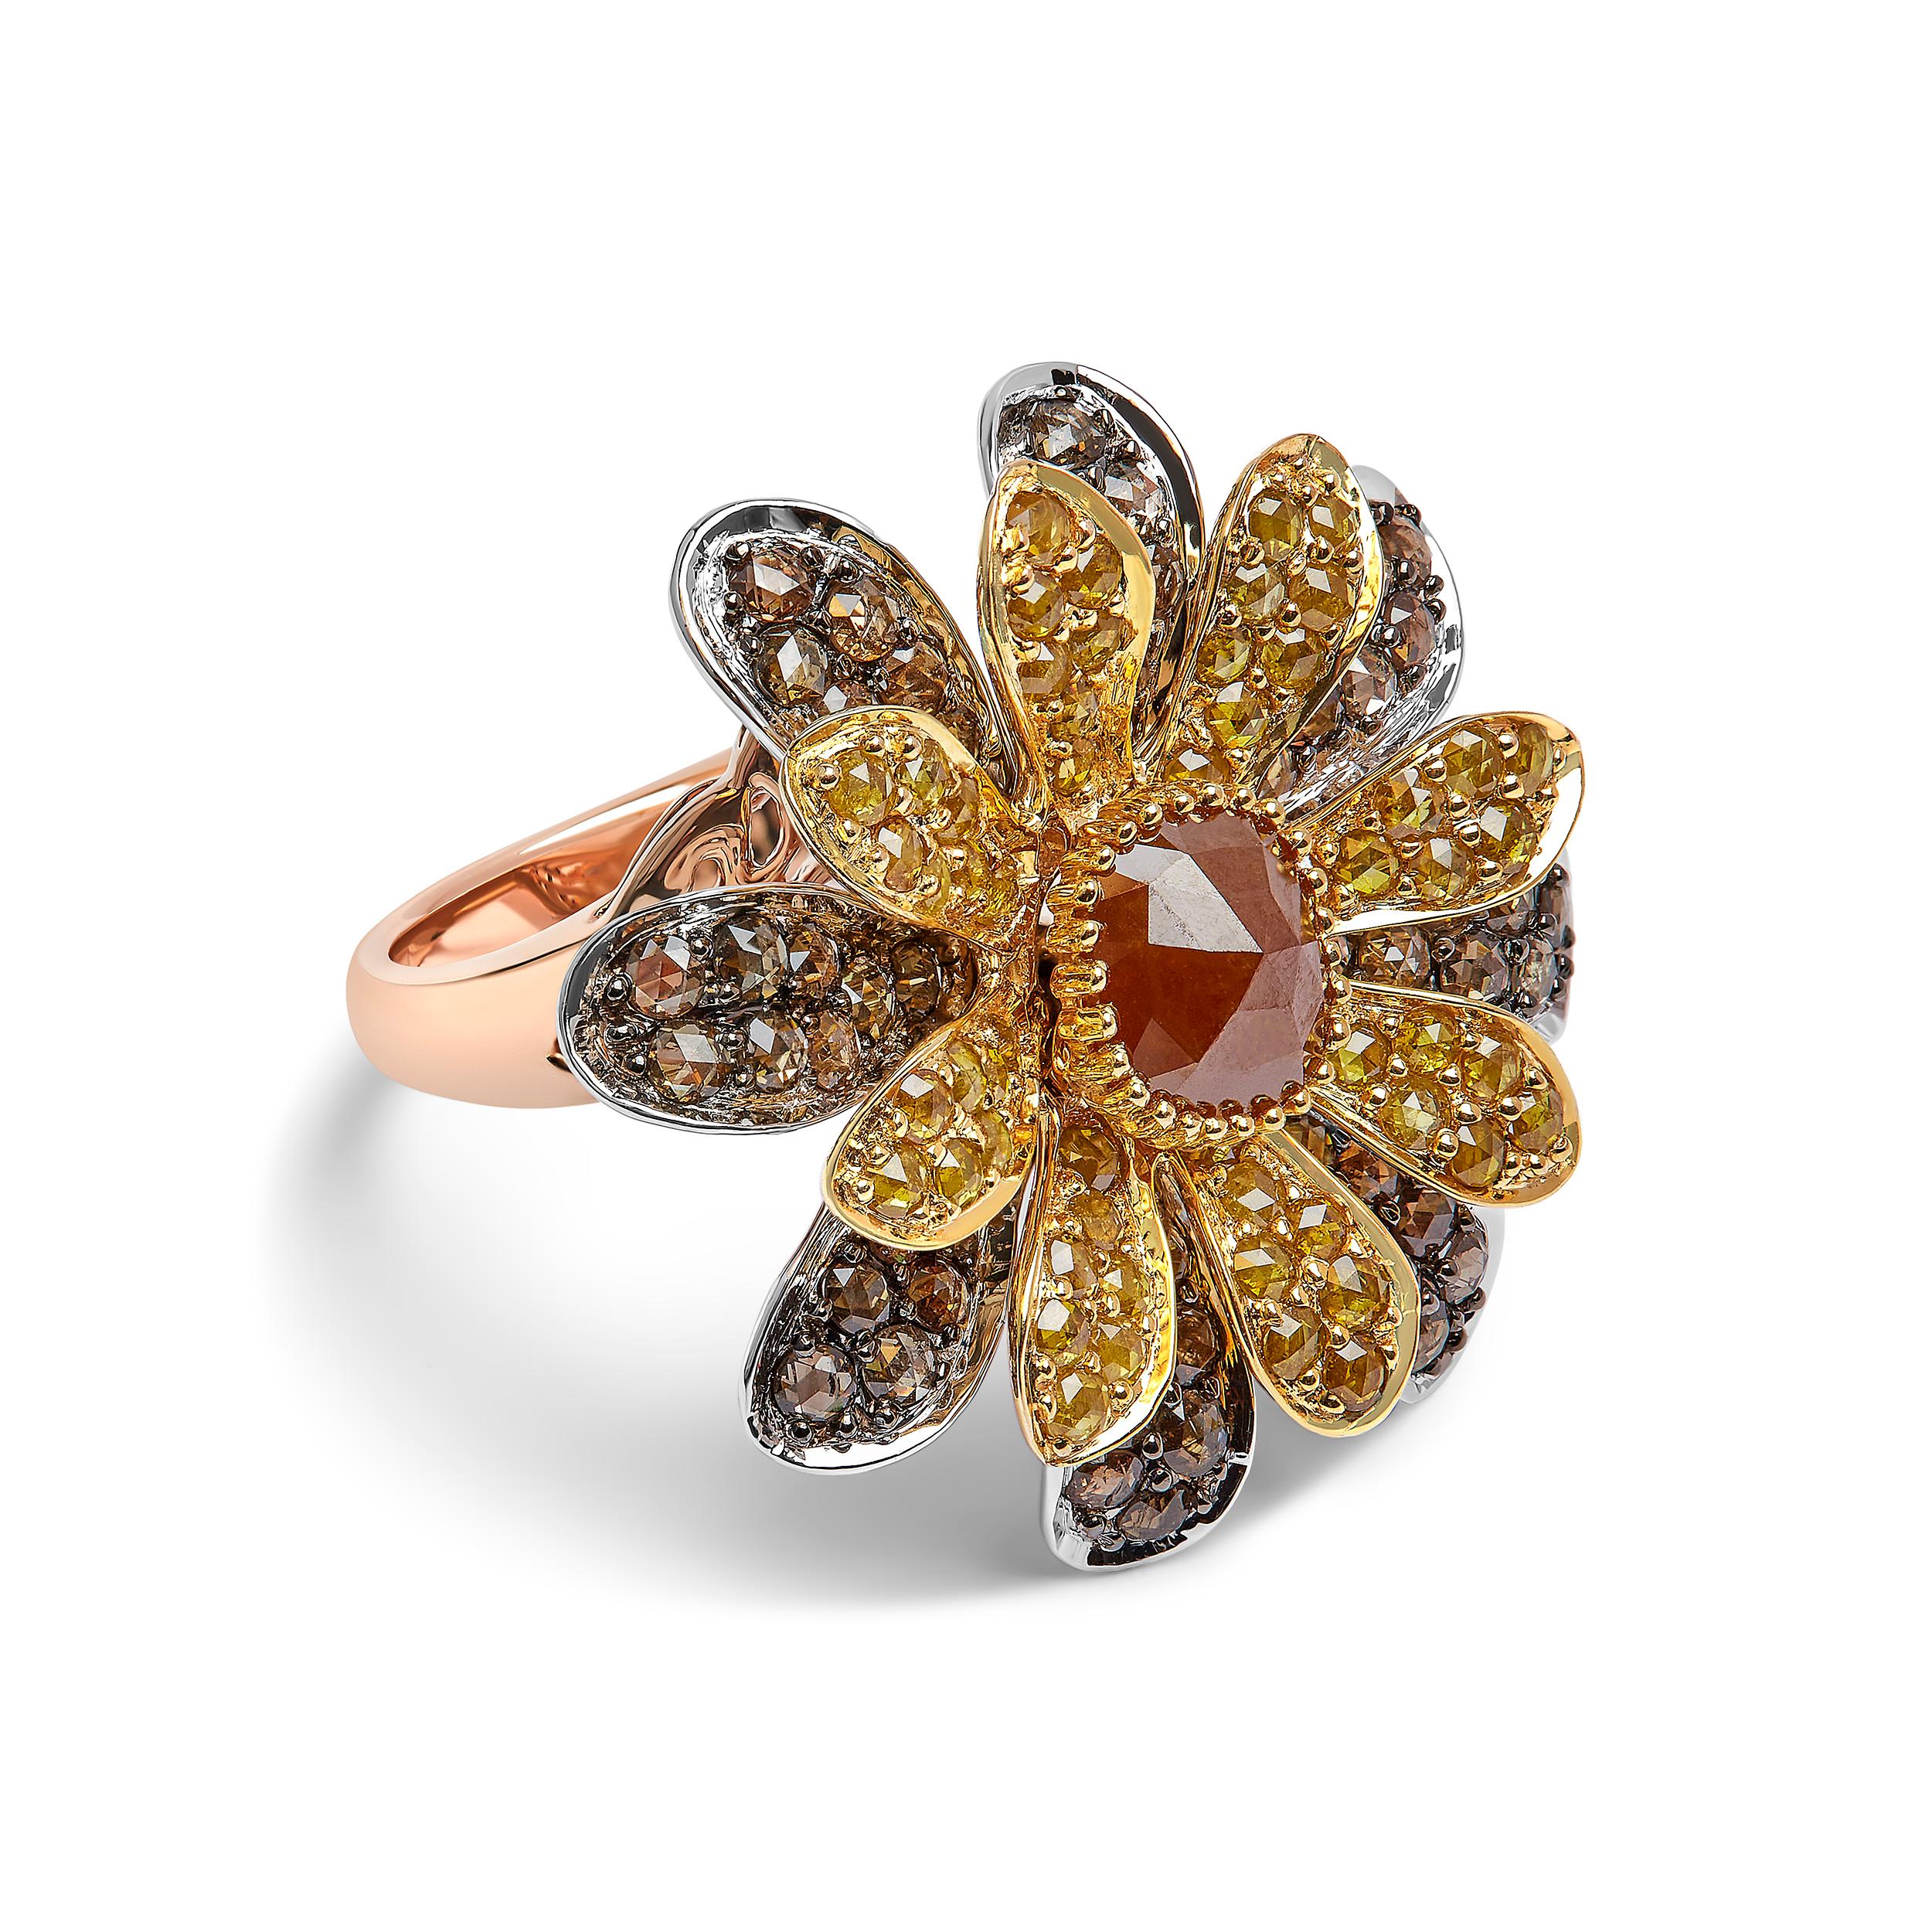 Introducing a mesmerizing masterpiece, this 14K Tri-Toned Cocktail Ring is a symbol of elegance and grace. Crafted with love and care, this ring features a dazzling array of 118 natural diamonds, boasting a total weight of 3 7/8 cttw. The exquisite